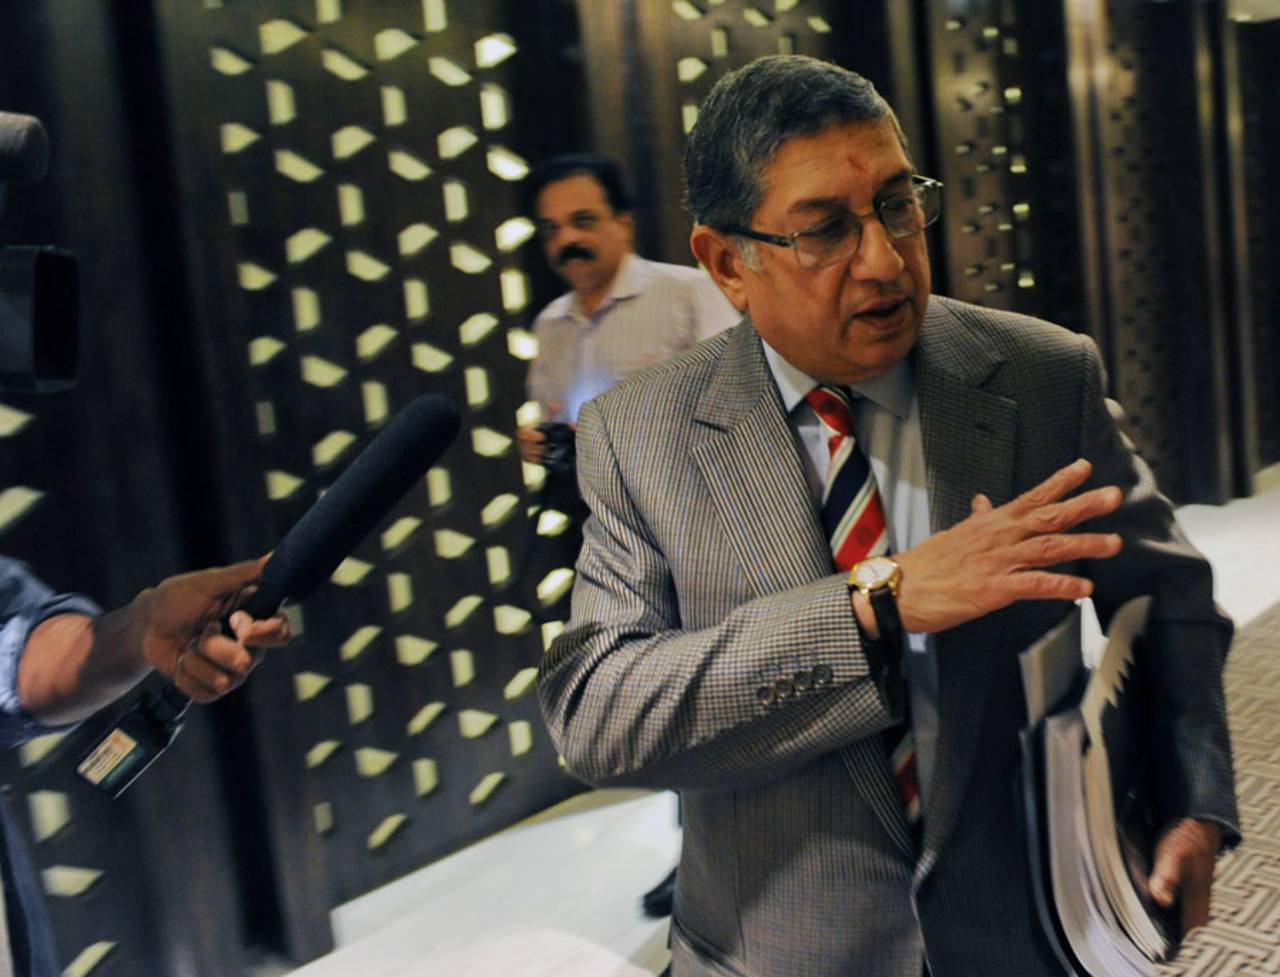 A Supreme Court order had barred N Srinivasan from contesting BCCI elections until he gave up his commercial interest in the Chennai Super Kings franchise&nbsp;&nbsp;&bull;&nbsp;&nbsp;AFP